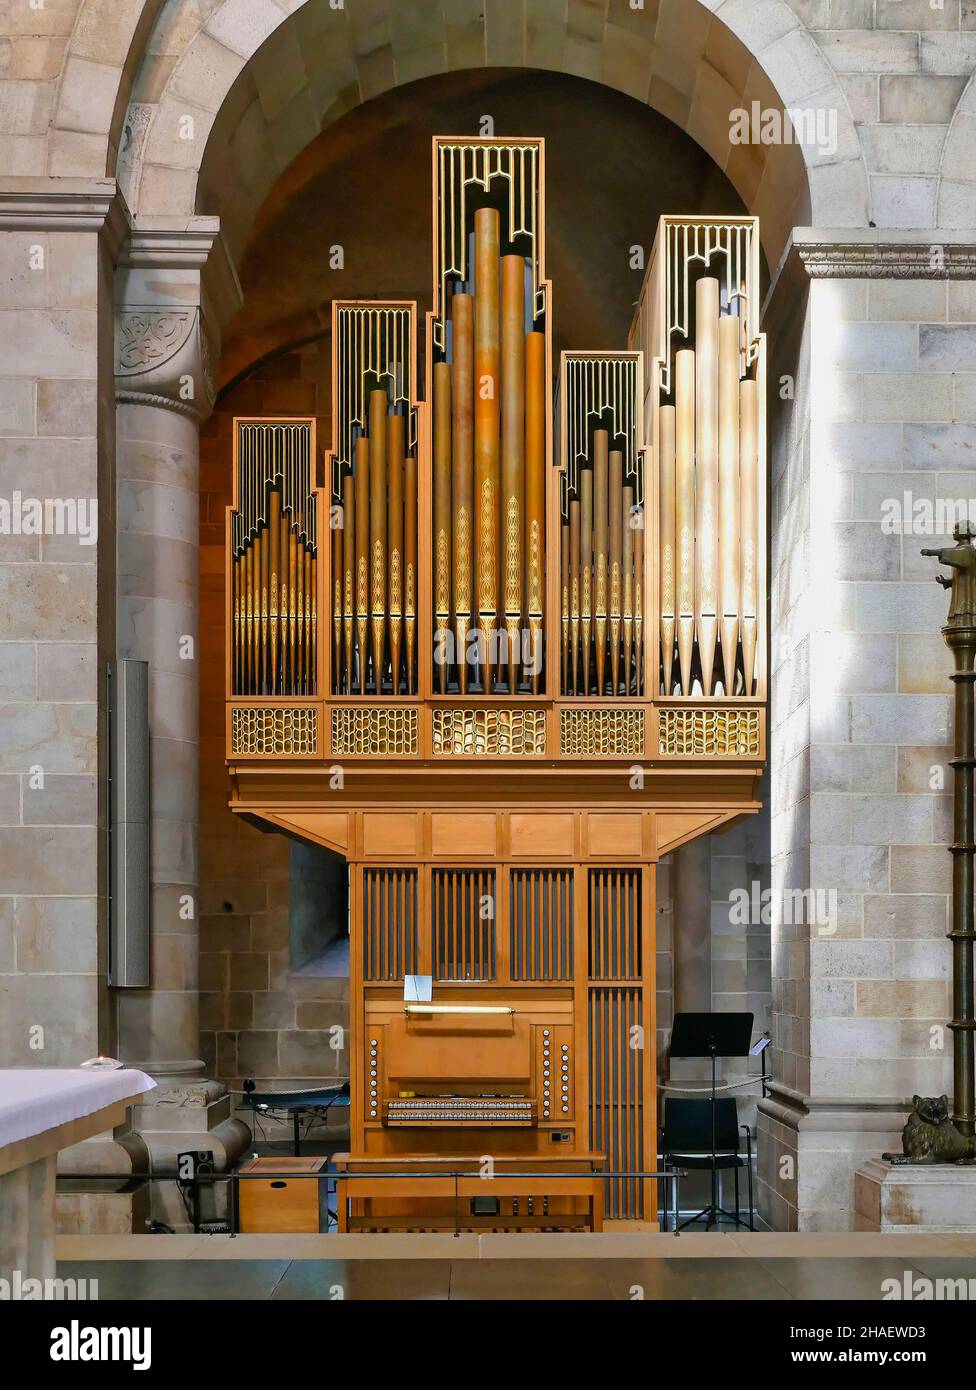 Lund, Sweden. August 2021. Organ in the Lund Cathedral. Stock Photo